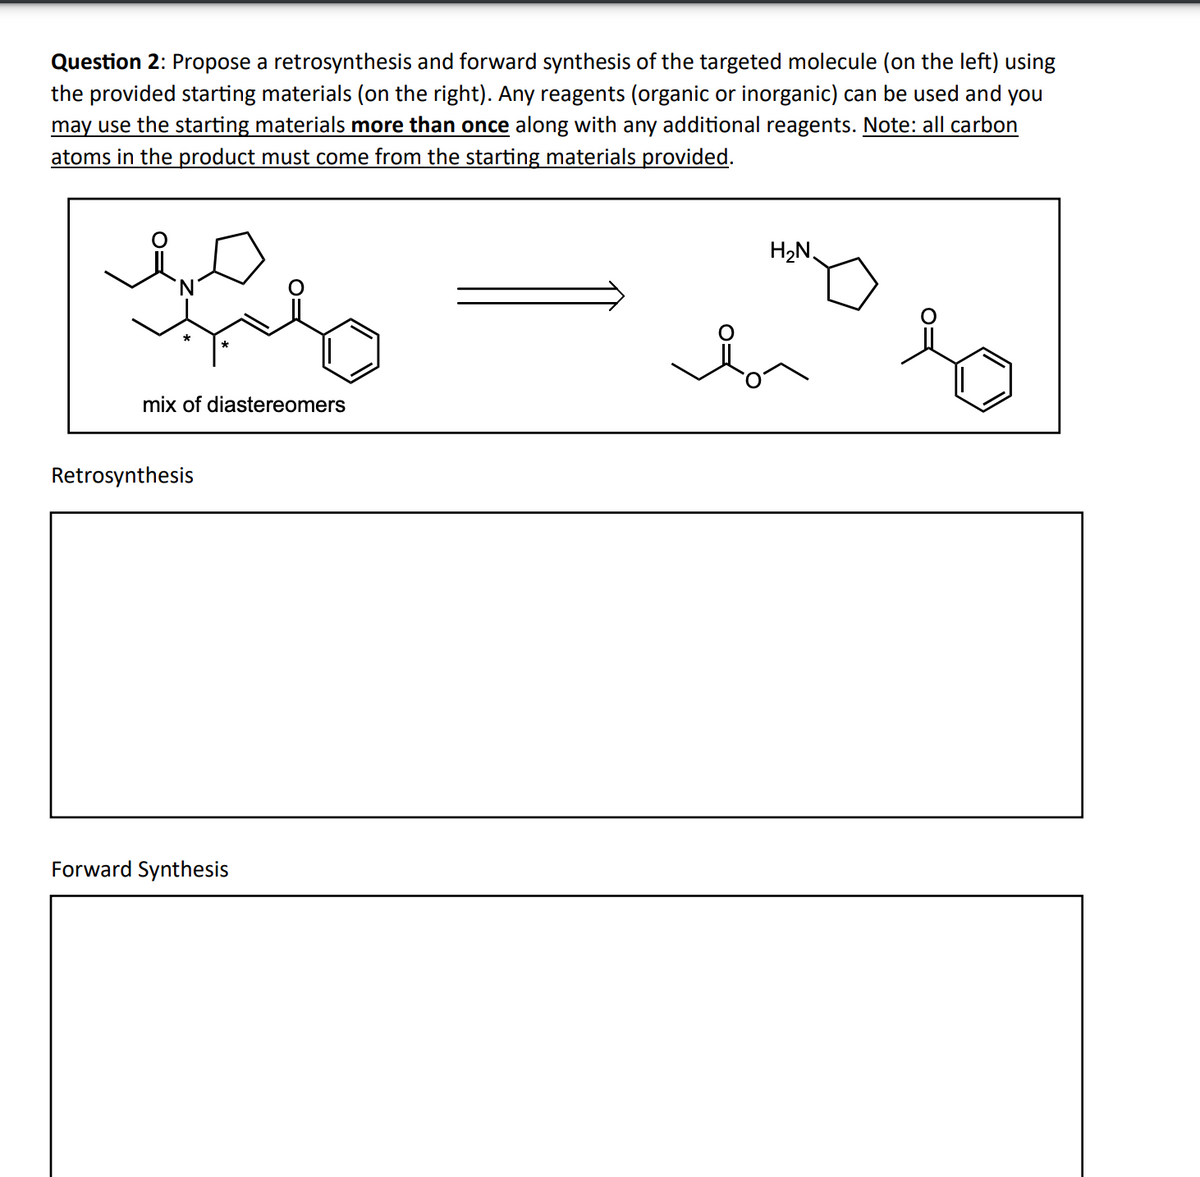 Question 2: Propose a retrosynthesis and forward synthesis of the targeted molecule (on the left) using
the provided starting materials (on the right). Any reagents (organic or inorganic) can be used and you
may use the starting materials more than once along with any additional reagents. Note: all carbon
atoms in the product must come from the starting materials provided.
'N
mix of diastereomers
Retrosynthesis
Forward Synthesis
b
H₂N